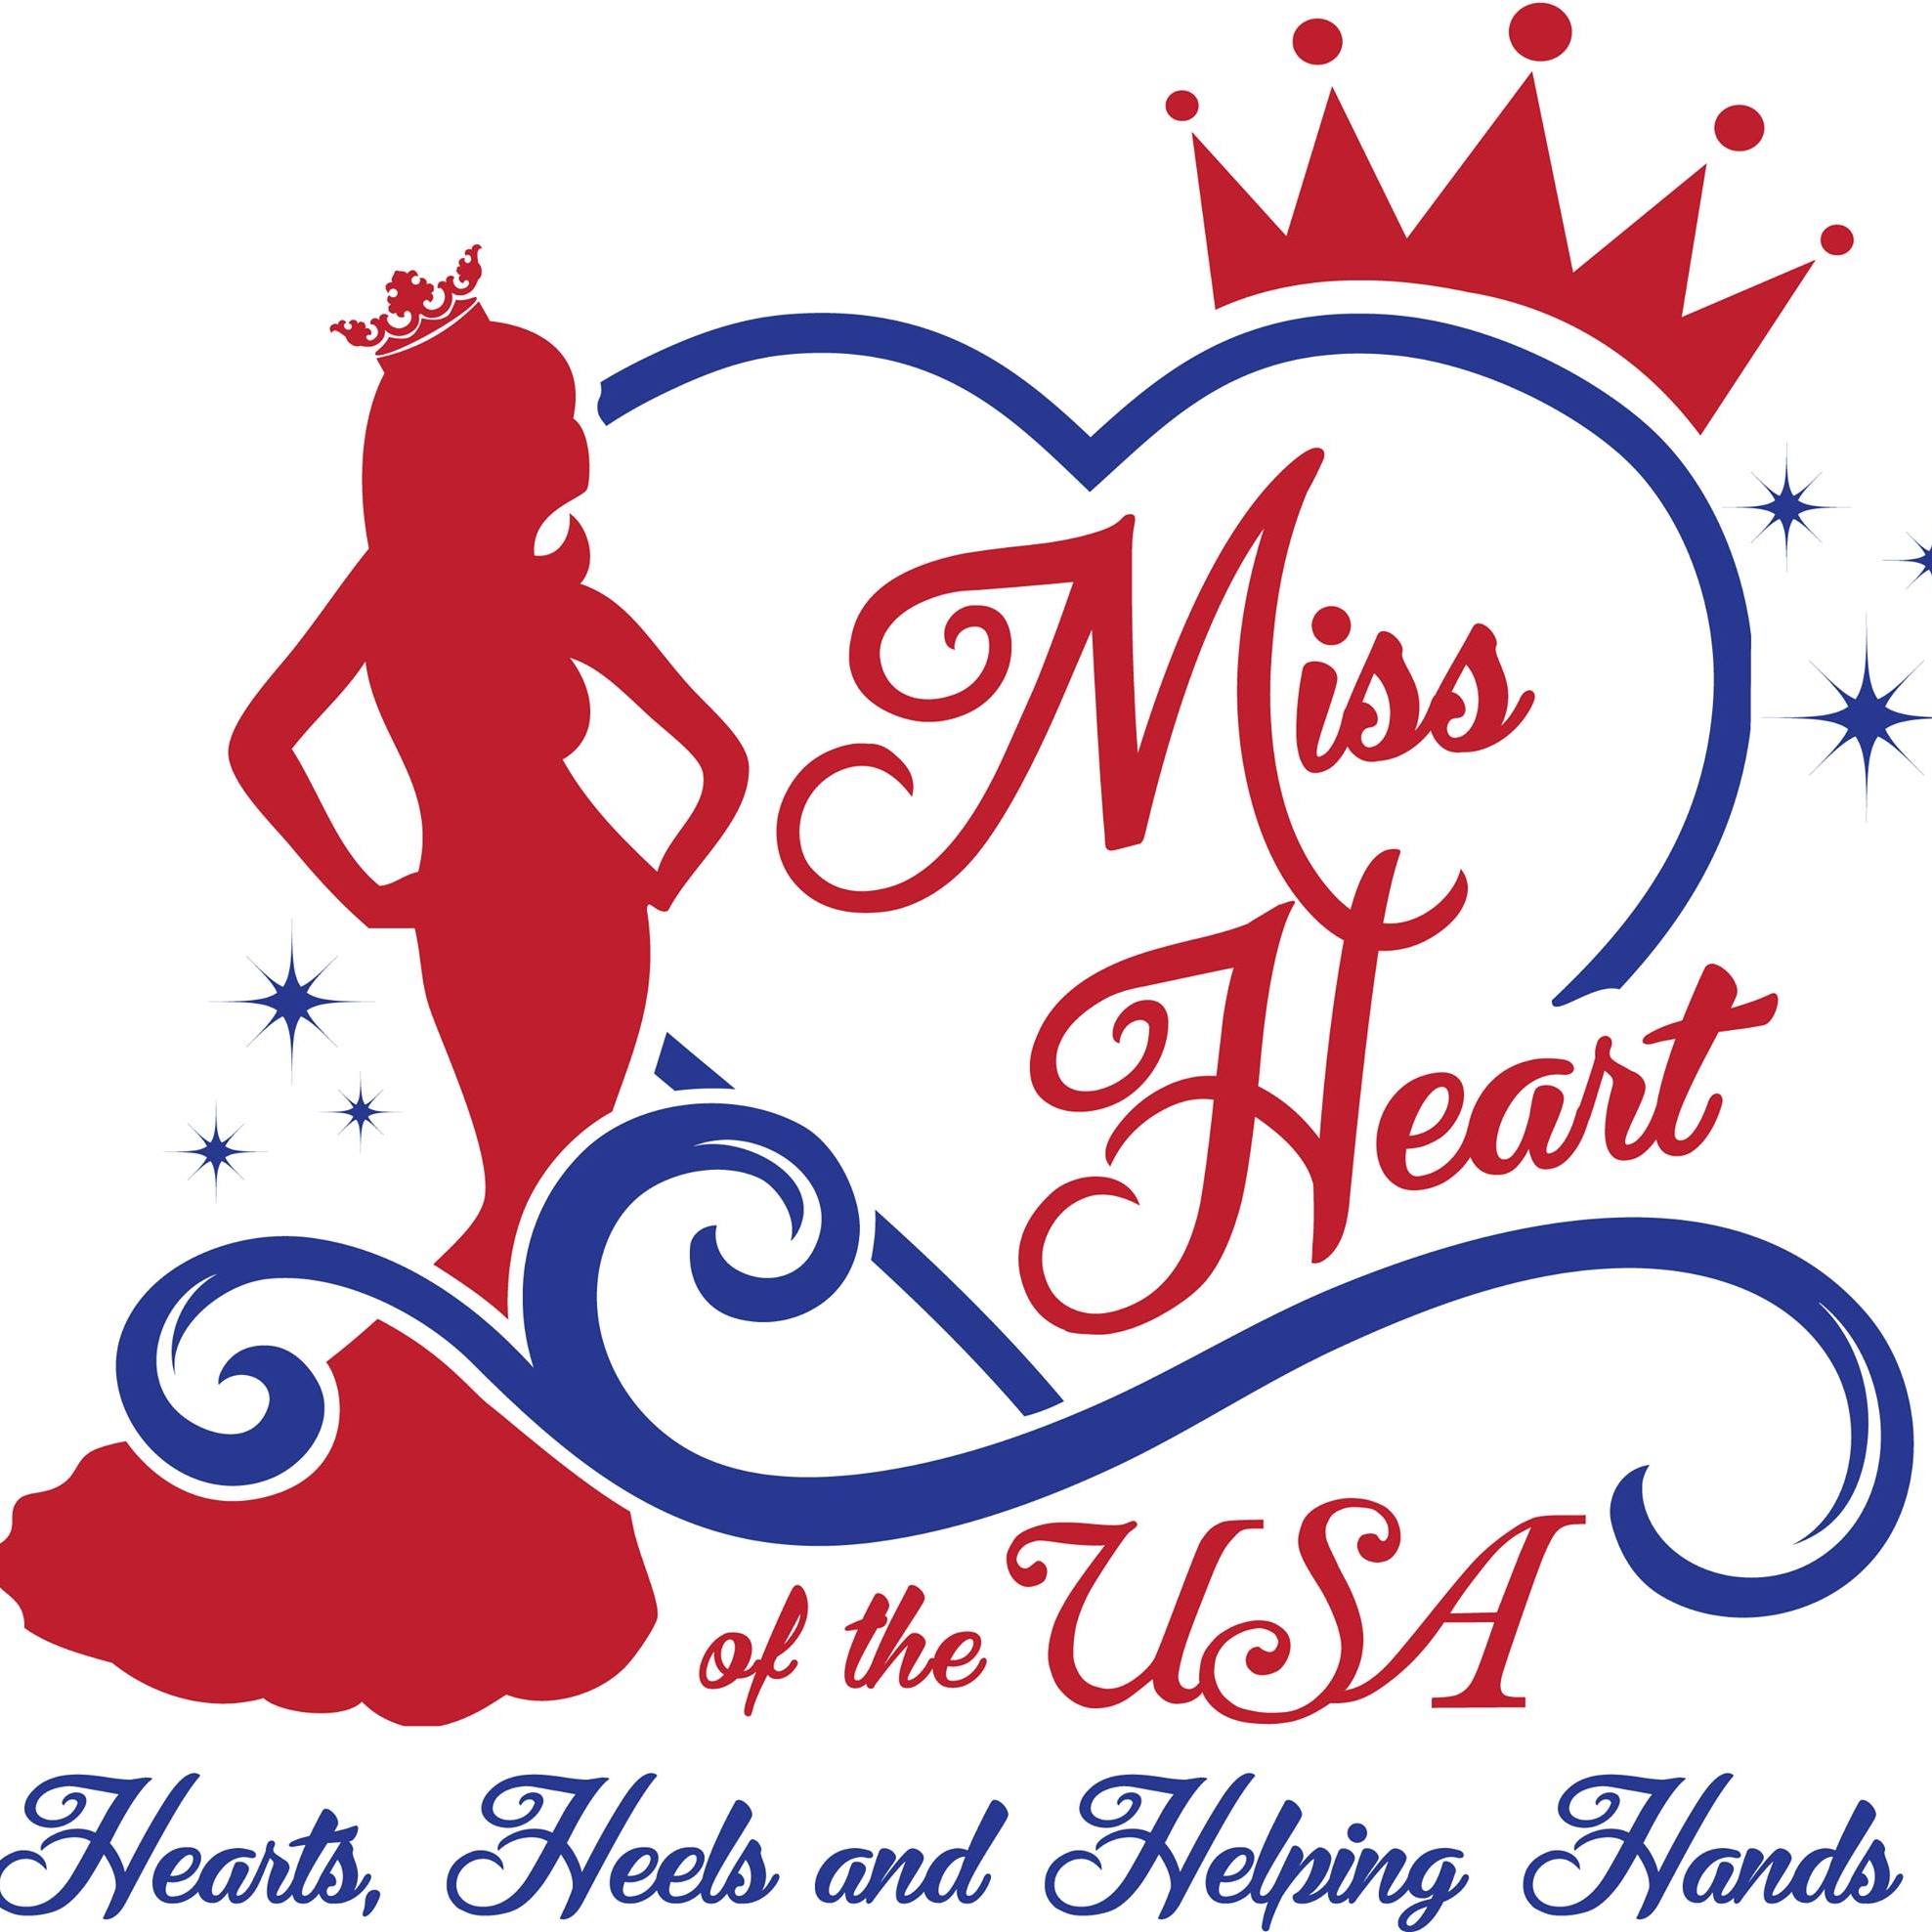 Miss Heart of the USA Pageant, Palm Beach, Florida, United States